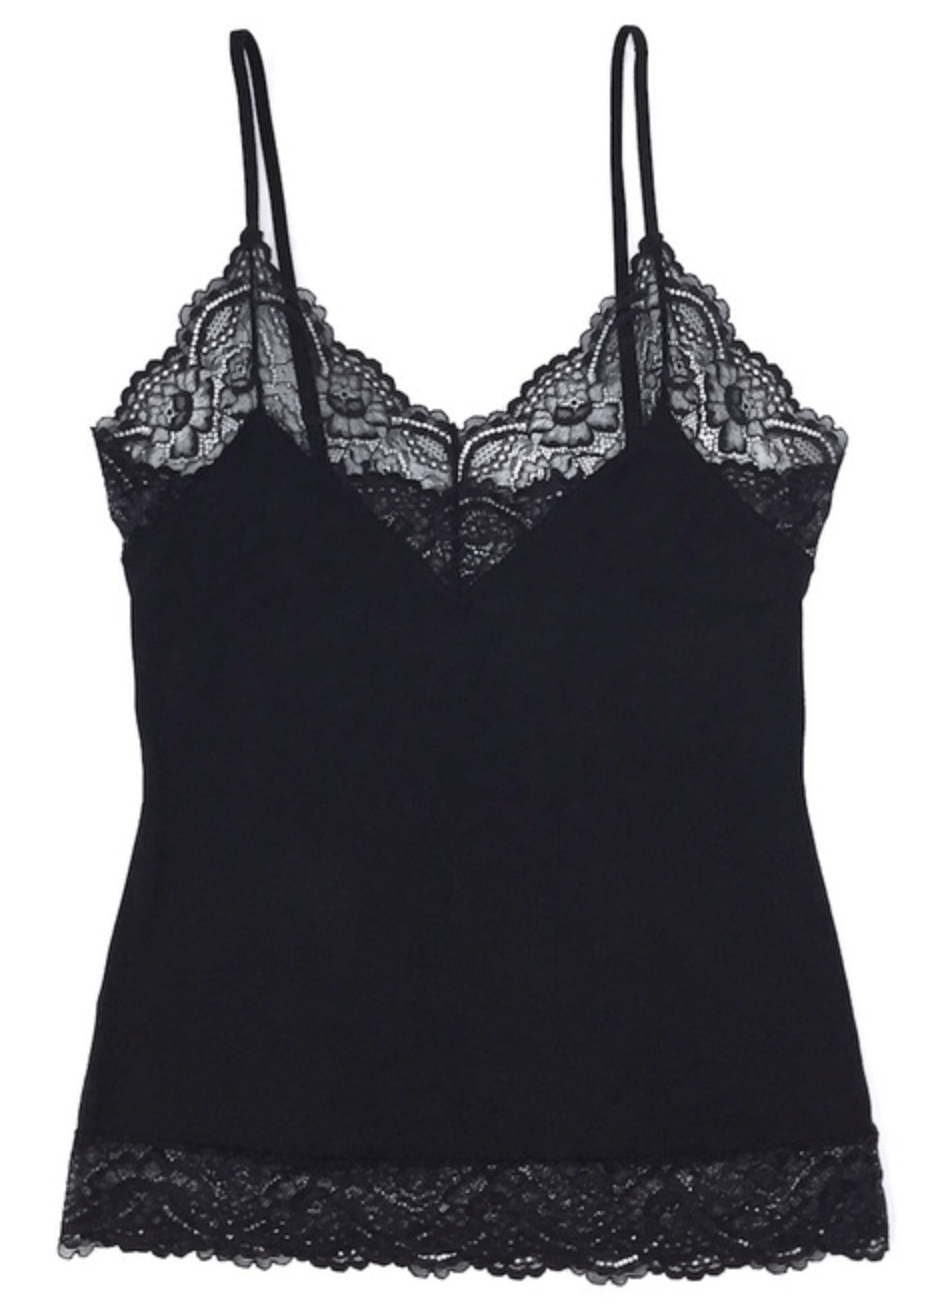 Samantha Chang camisole Black/Black Lace / S Samantha Chang Home Apparel Camisole